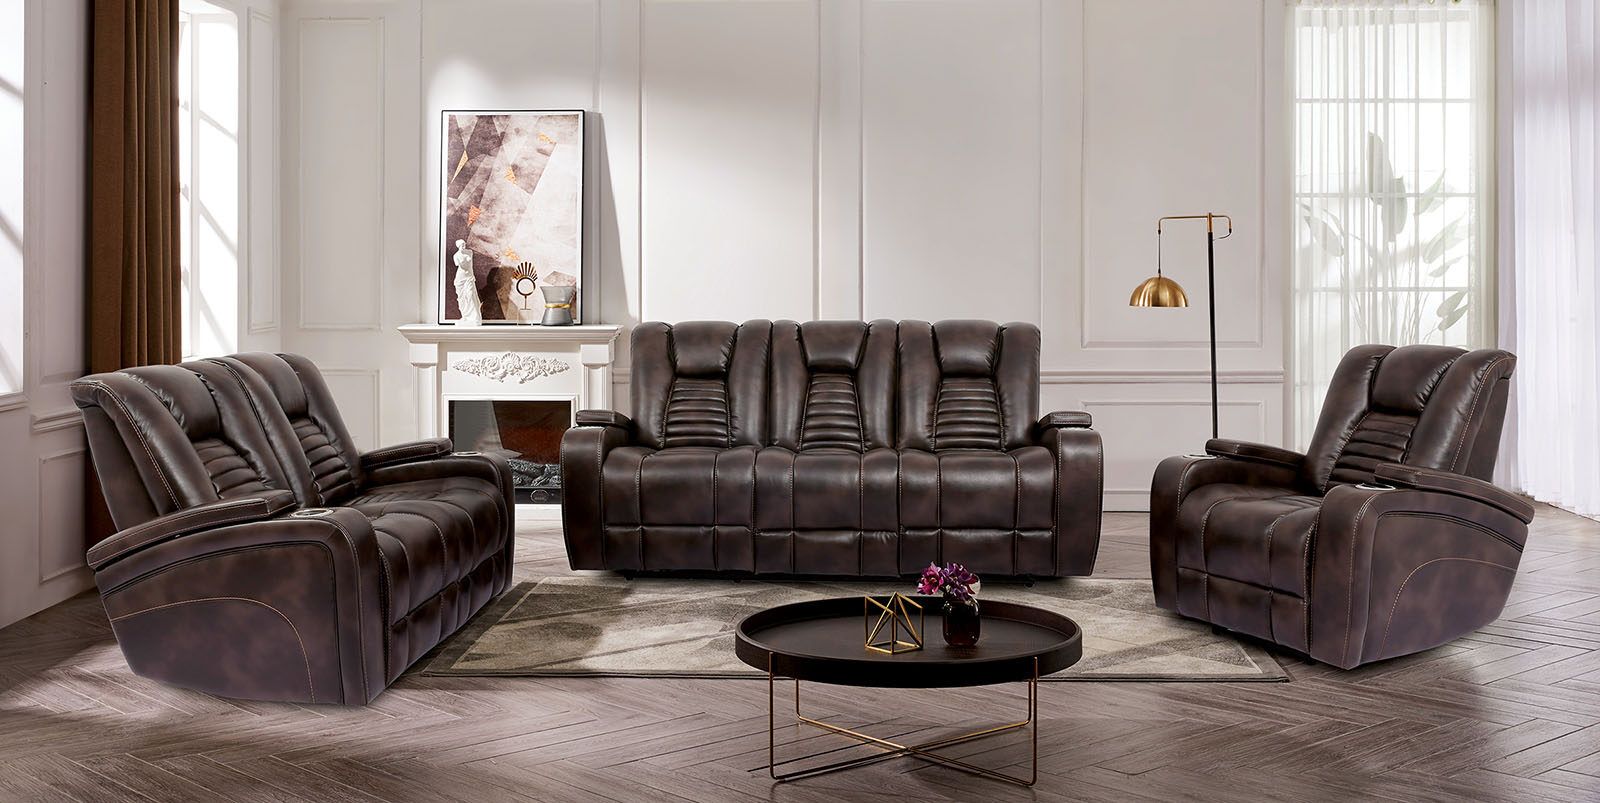 Furniture Of America Abrielle Sofa Cm9902 Sf | Comfyco Inside Faux Leather Sofas In Dark Brown (View 9 of 15)